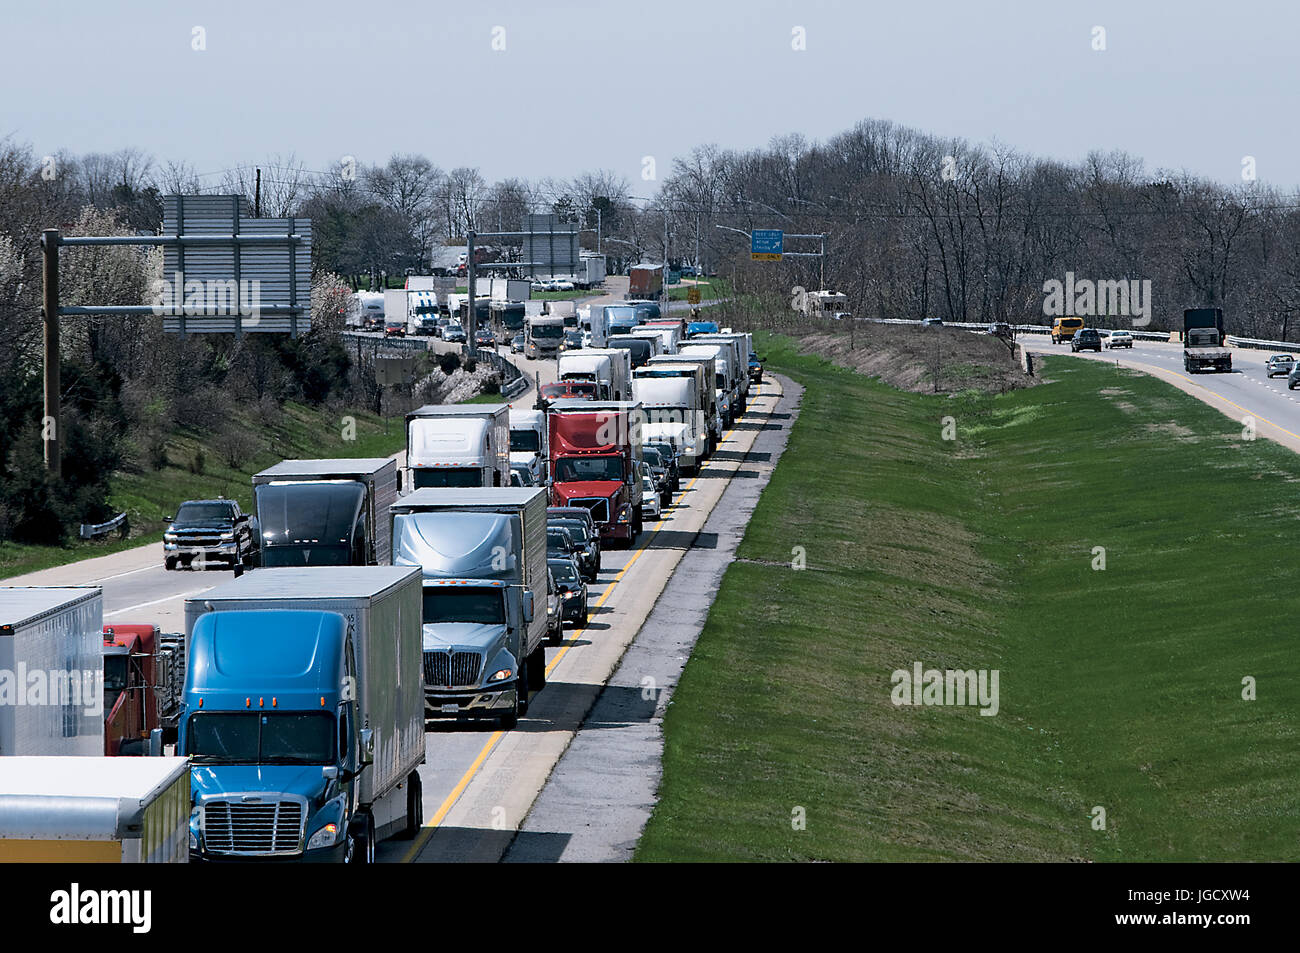 Traffic Jam on Highway with Trucks and Cars Stock Photo